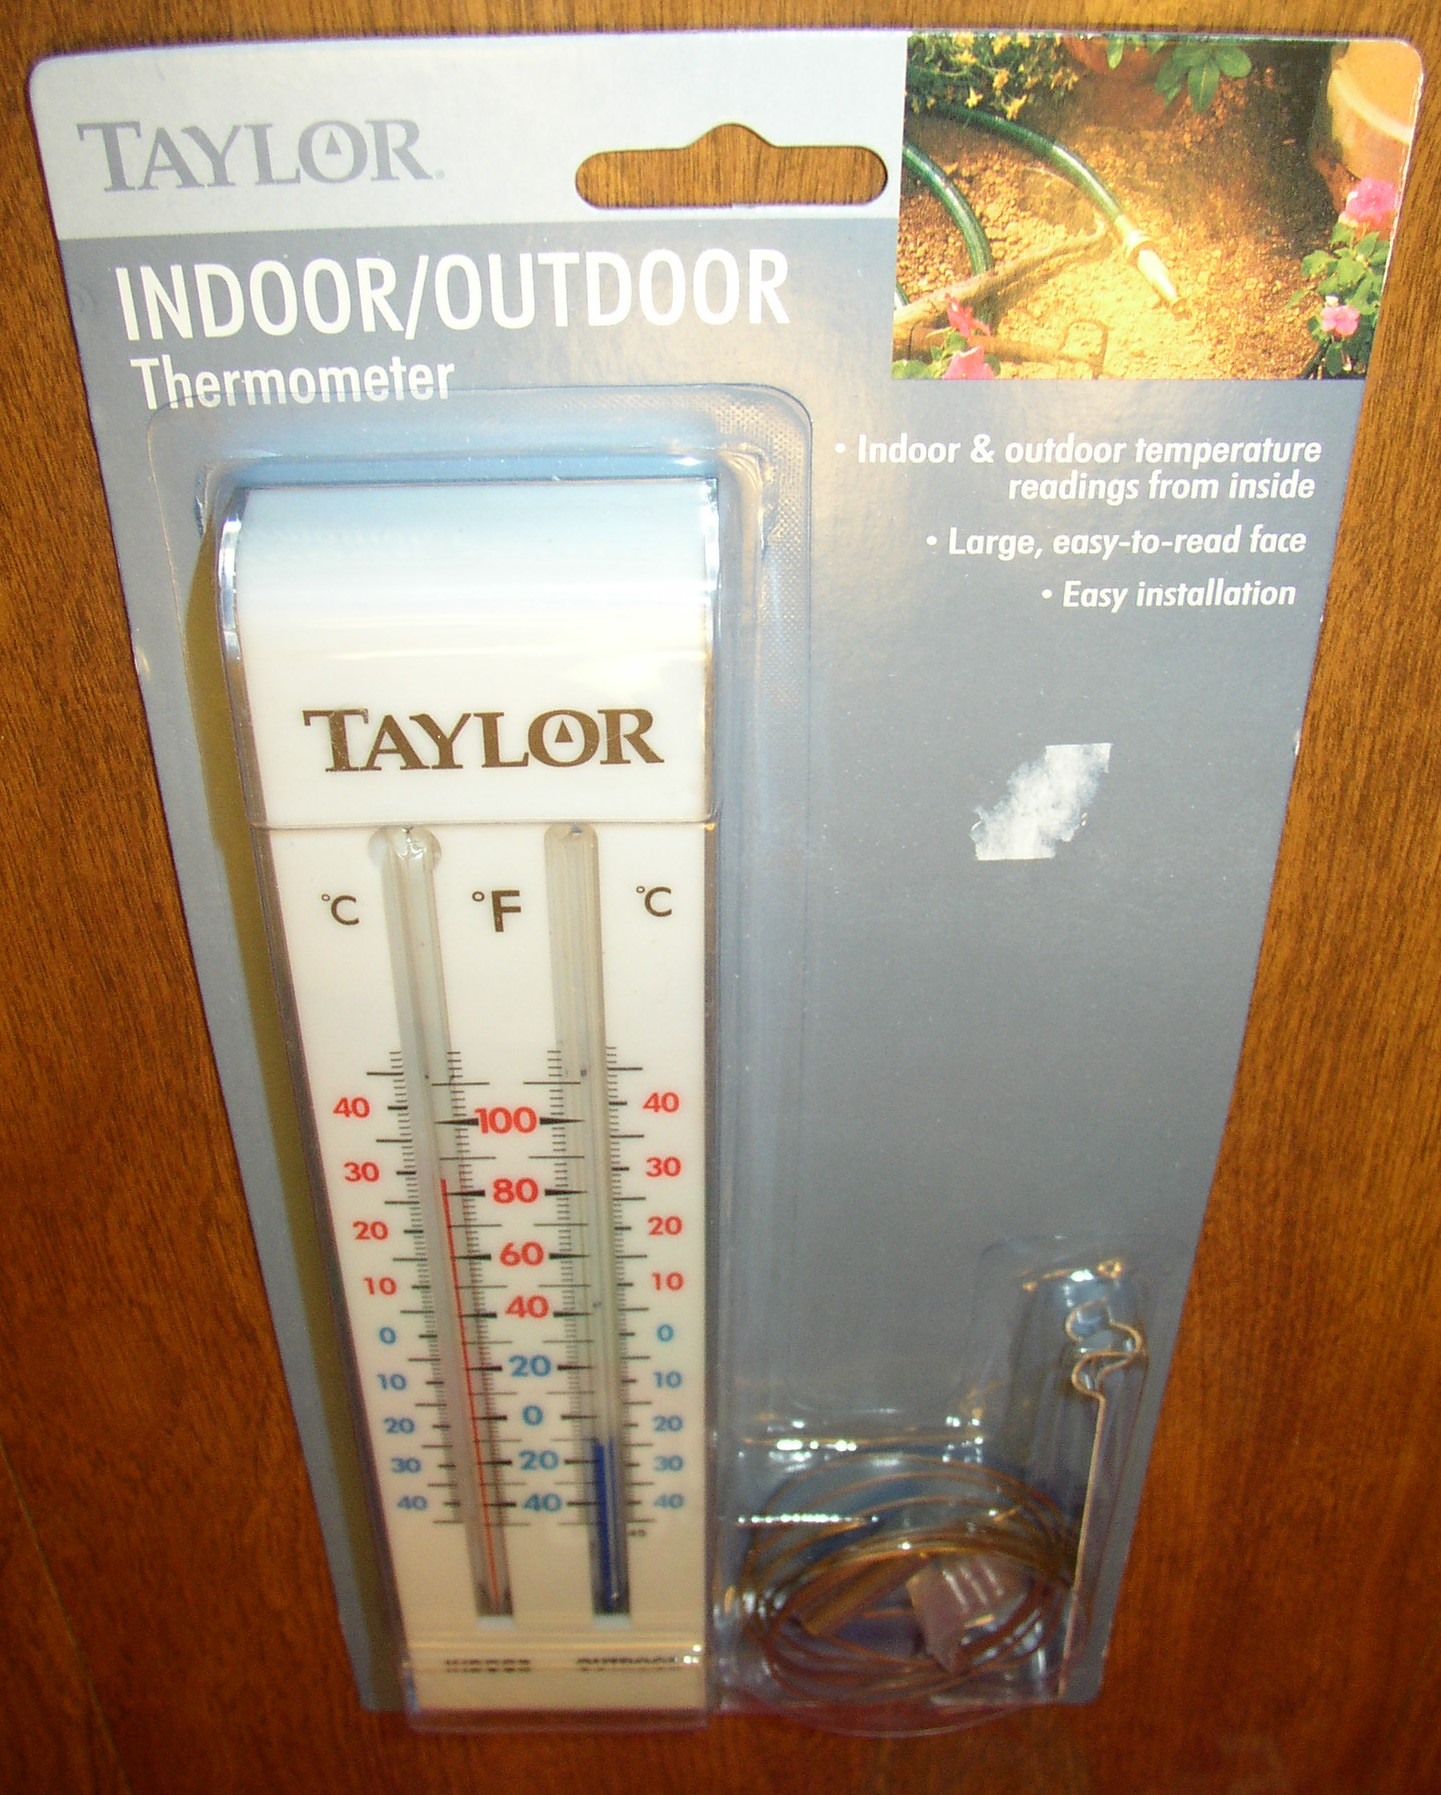 https://upload.wikimedia.org/wikipedia/commons/8/80/Indoor_Outdoor_Thermometer.jpg